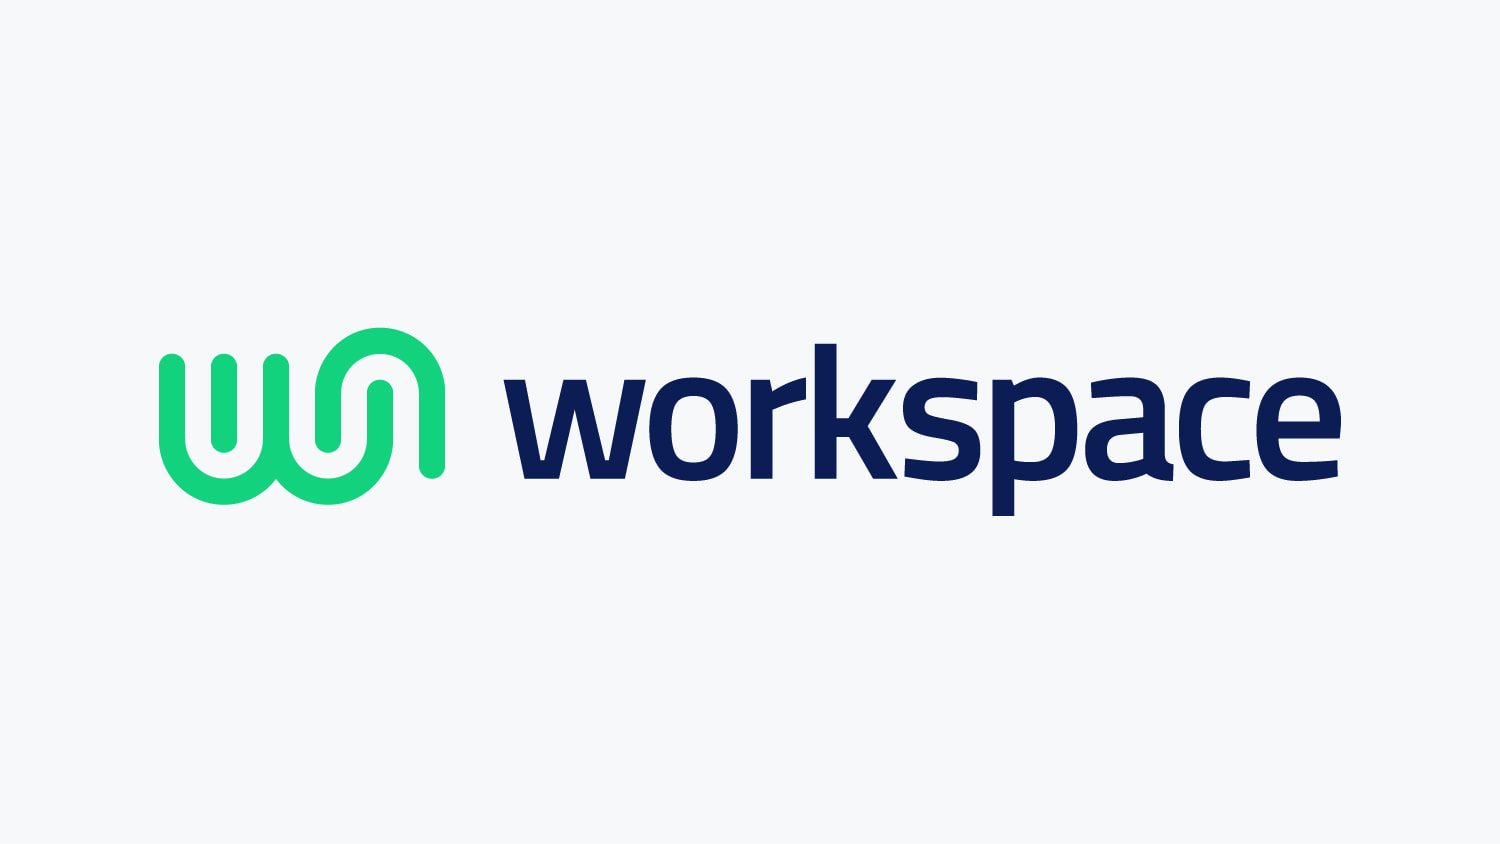 Workspace horizontal logo with the icon colored in electric mint green and the text colored in dark blue